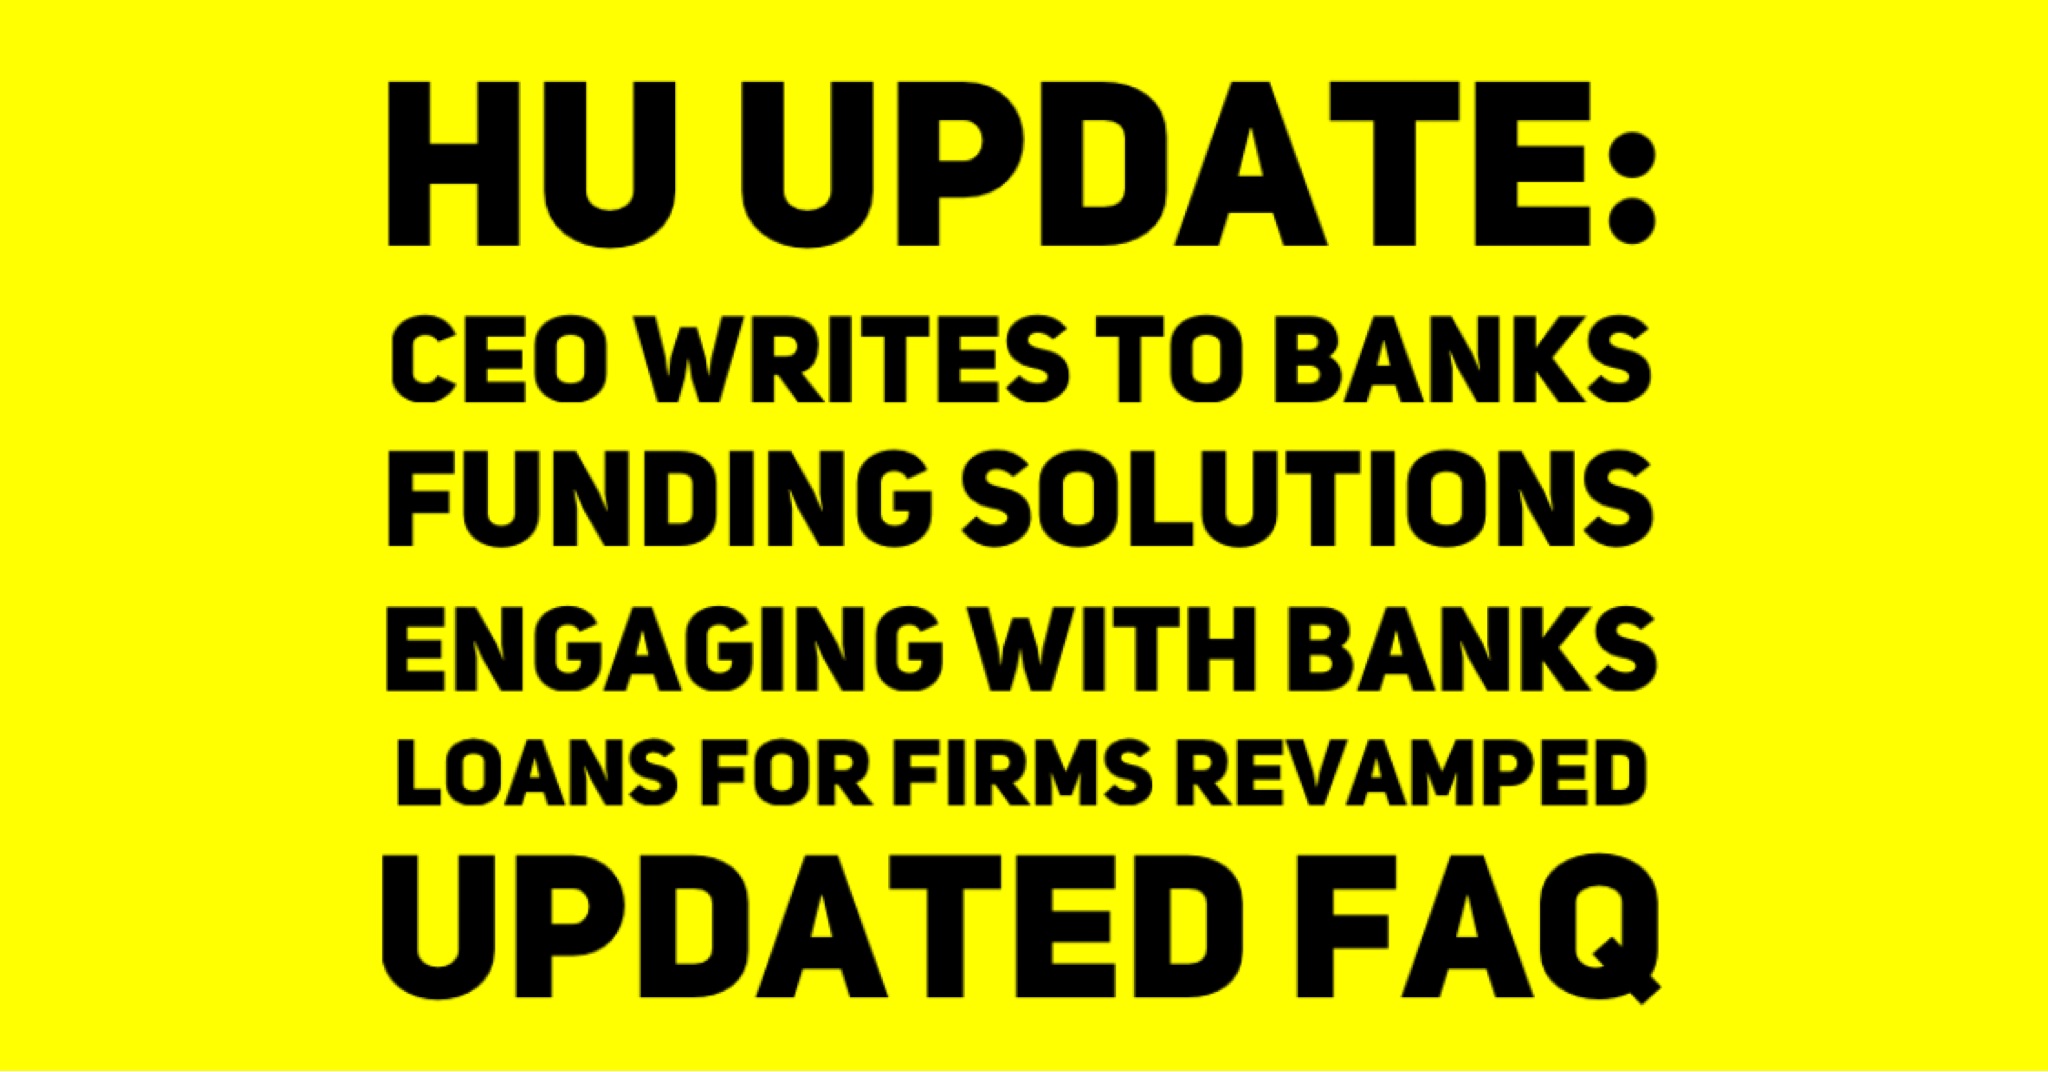 HU UPDATE CEO Writes to Banks Funding Solutions Engaging With Banks Loans Revamped Updated FAQ